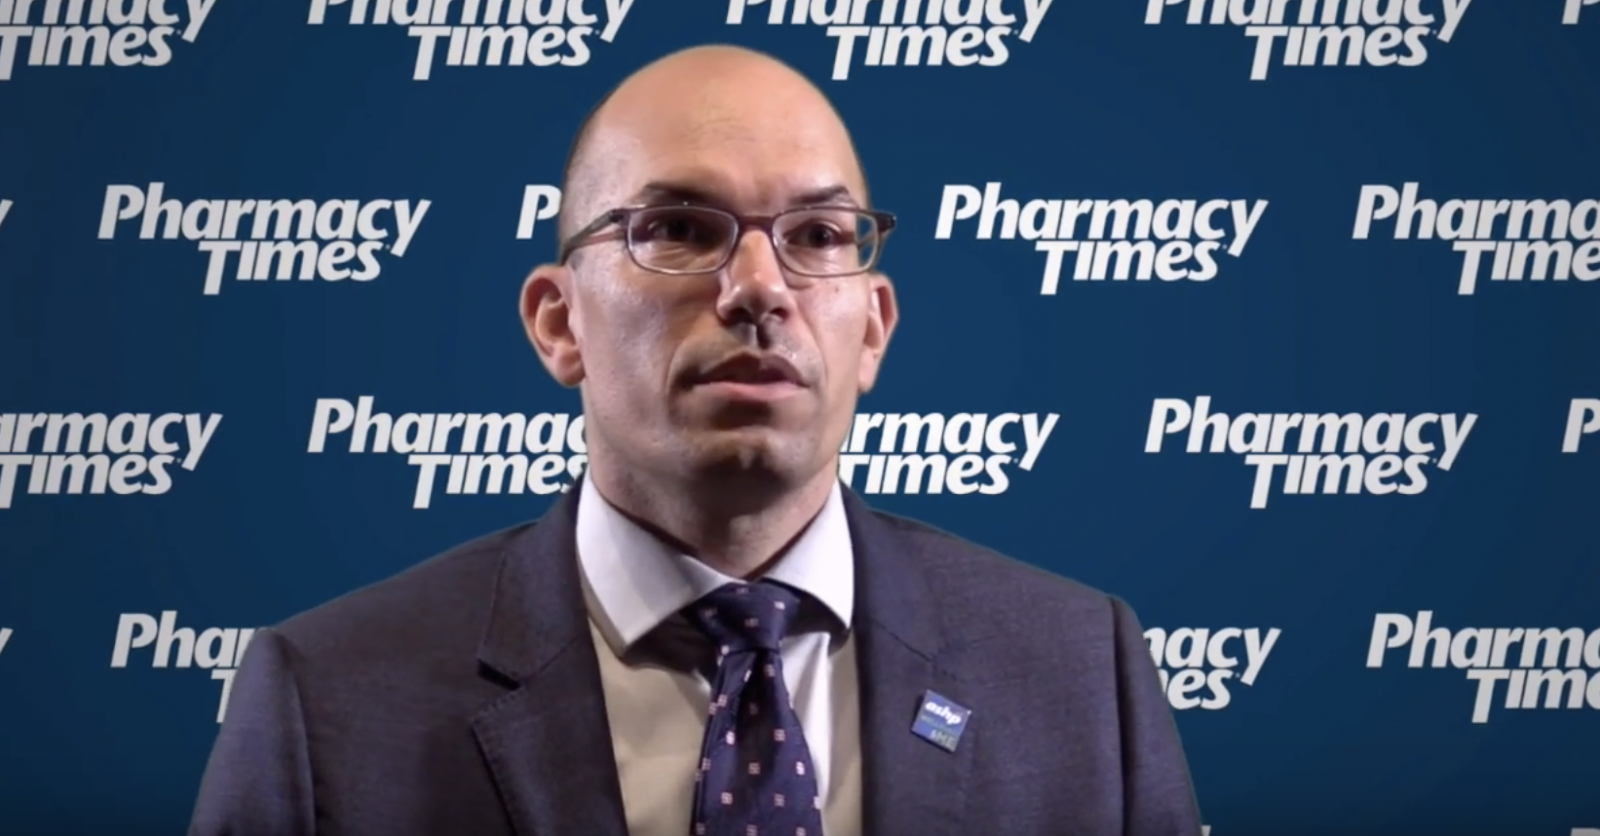 Pharmacists Play Key Role in Advocacy